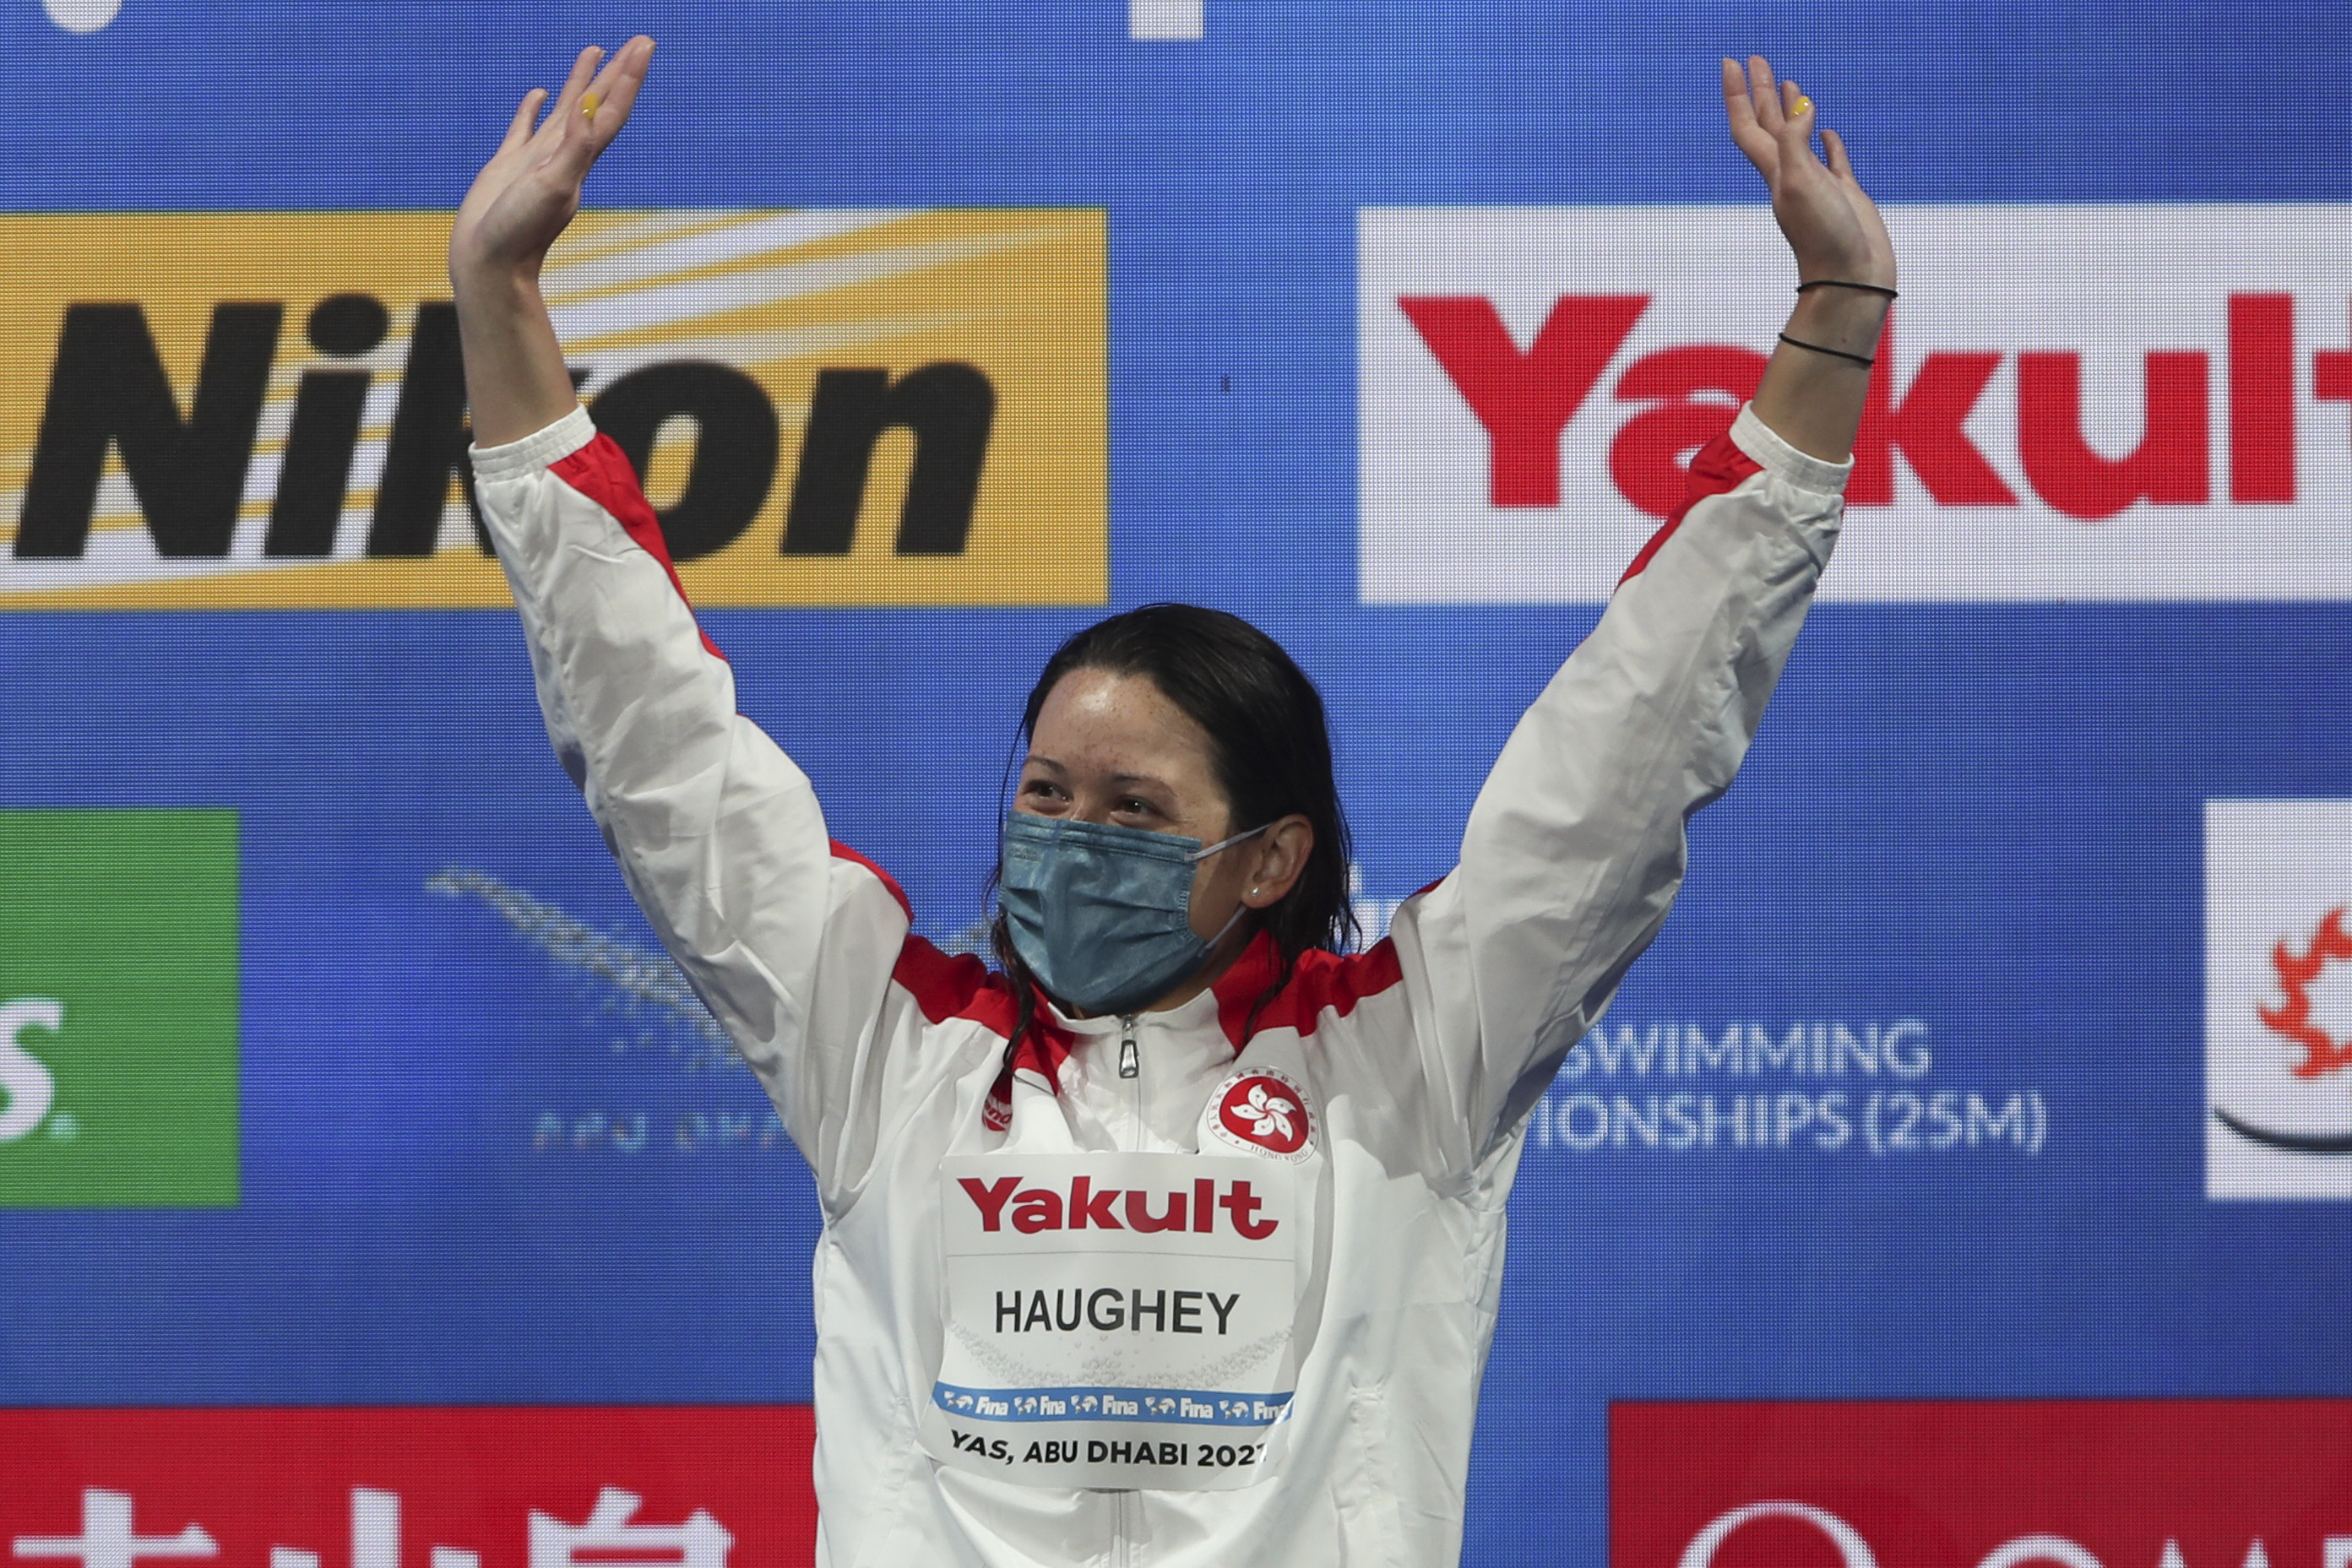 Siobhan Bernadette Haughey stands on the podium after winning the 100m freestyle at the World Swimming Championships in Abu Dhabi in December. Photo: AP